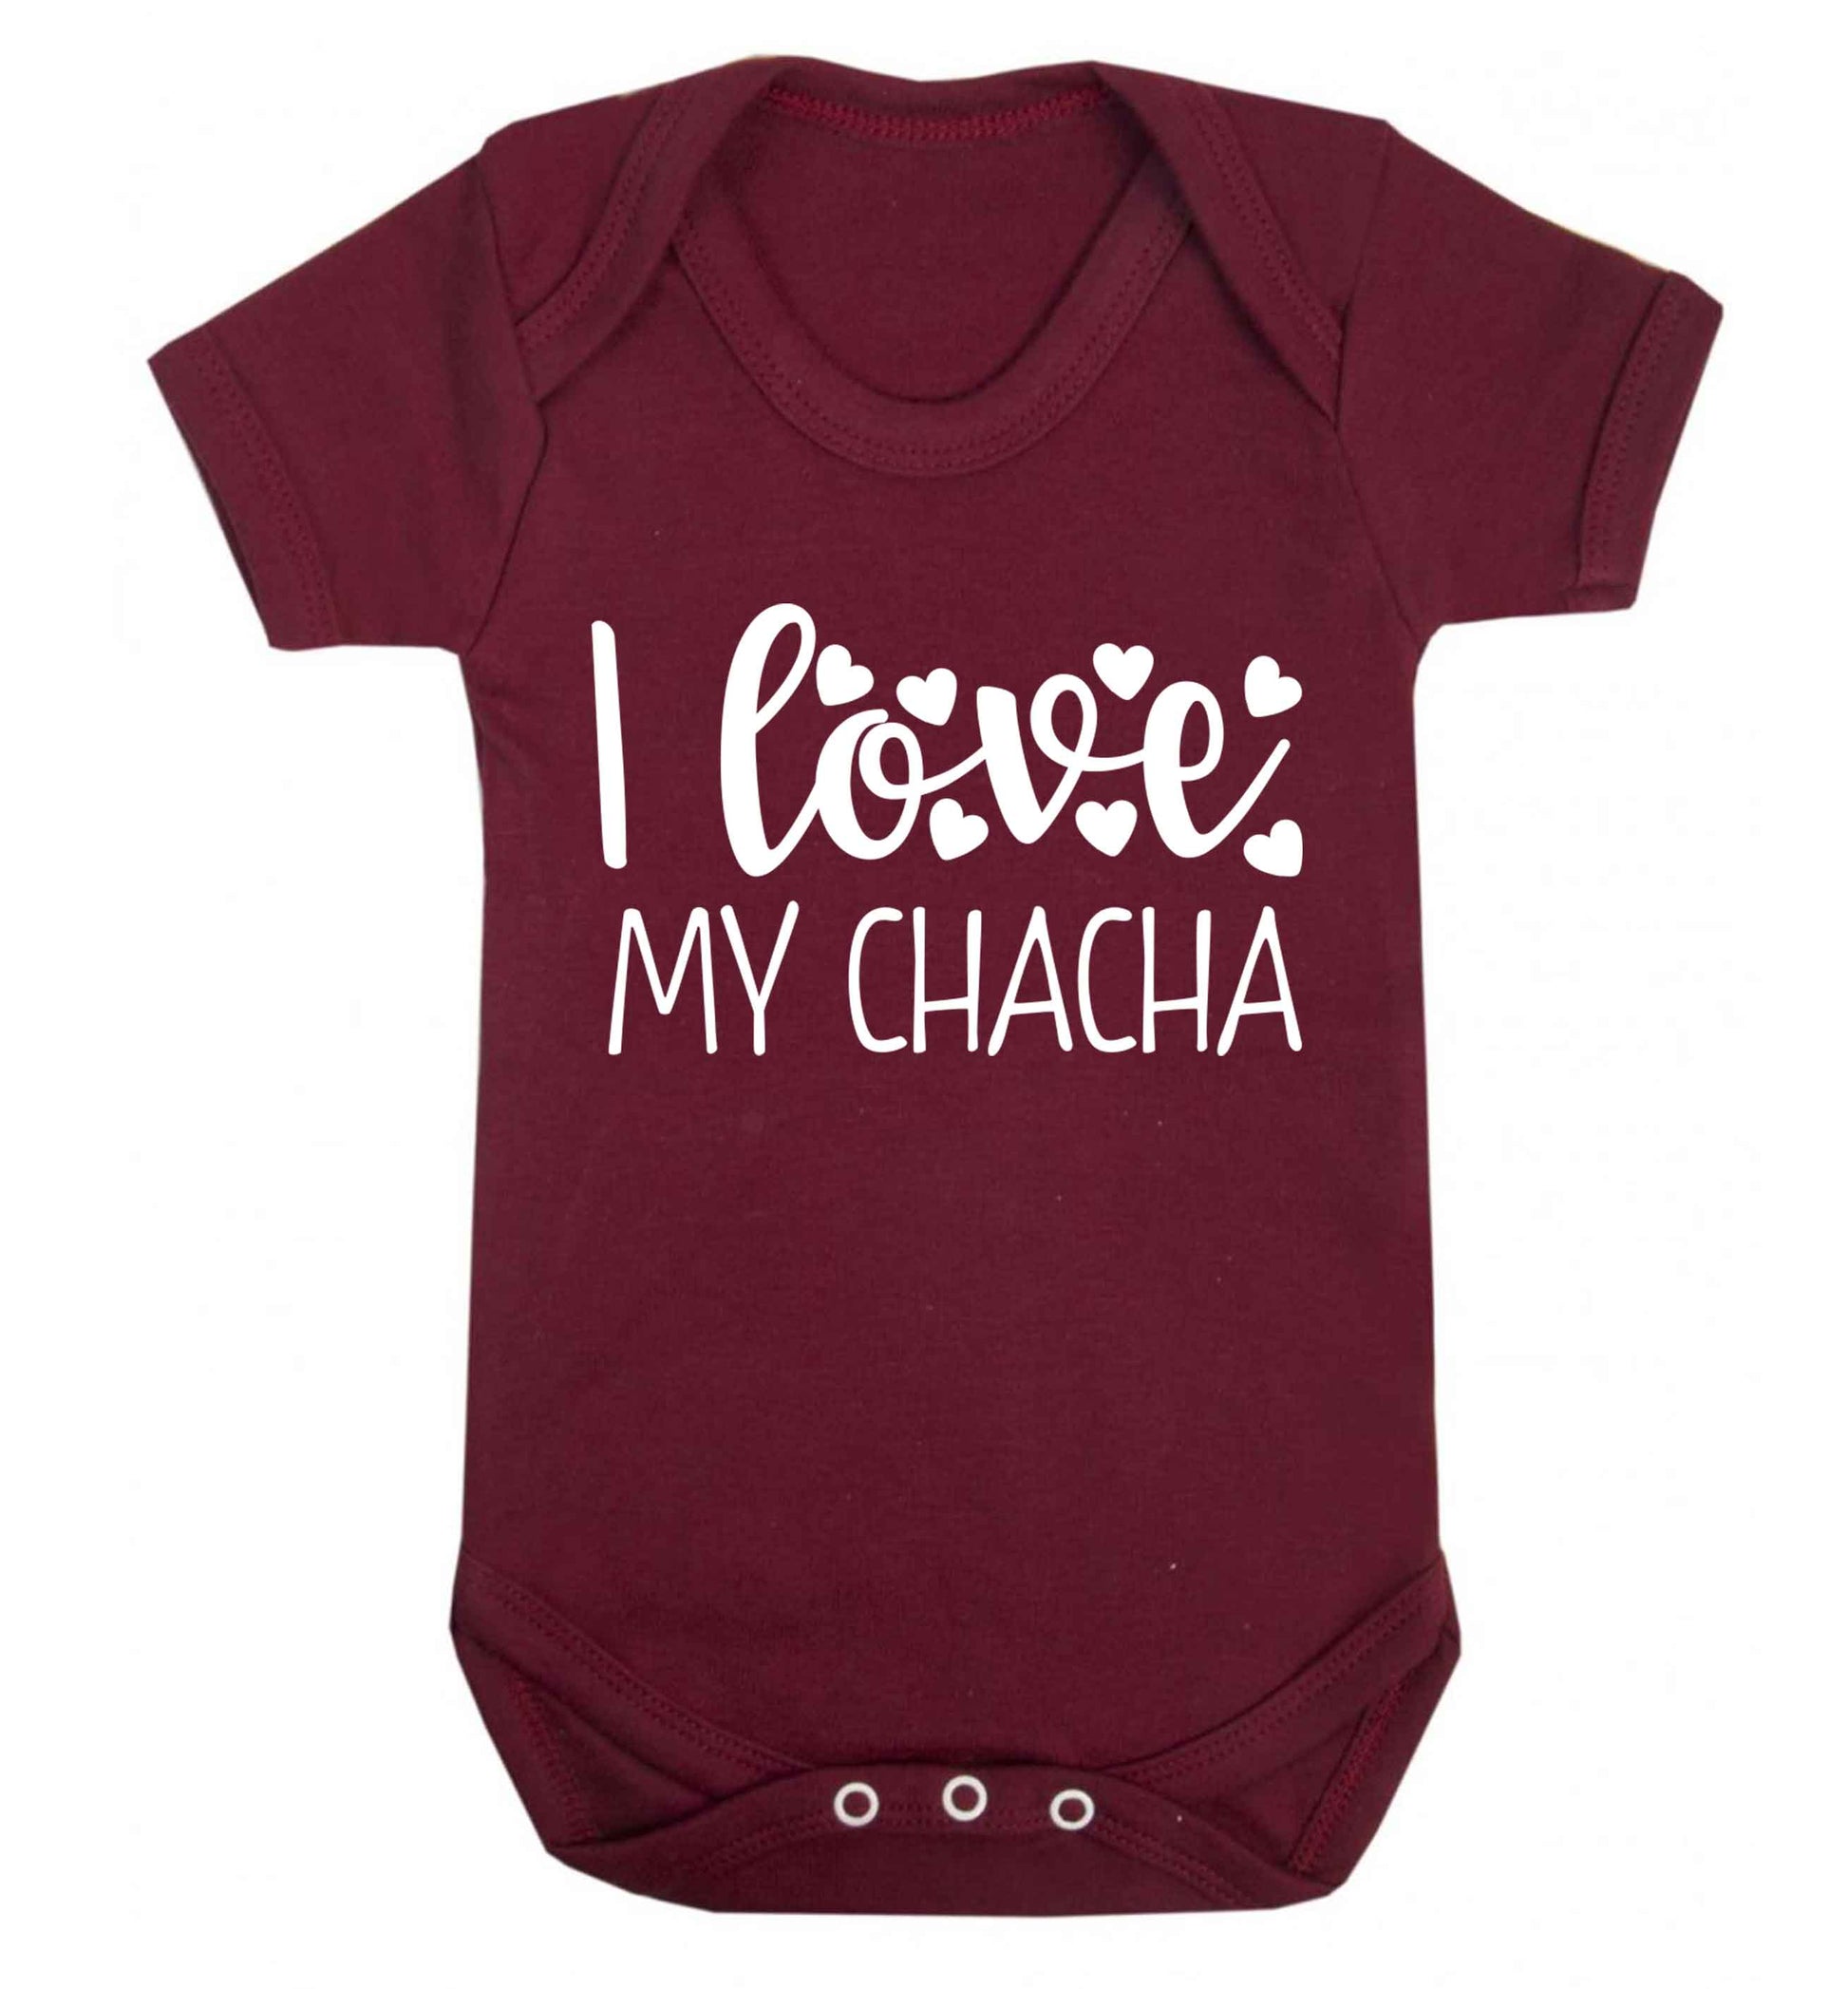 I love my chacha Baby Vest maroon 18-24 months